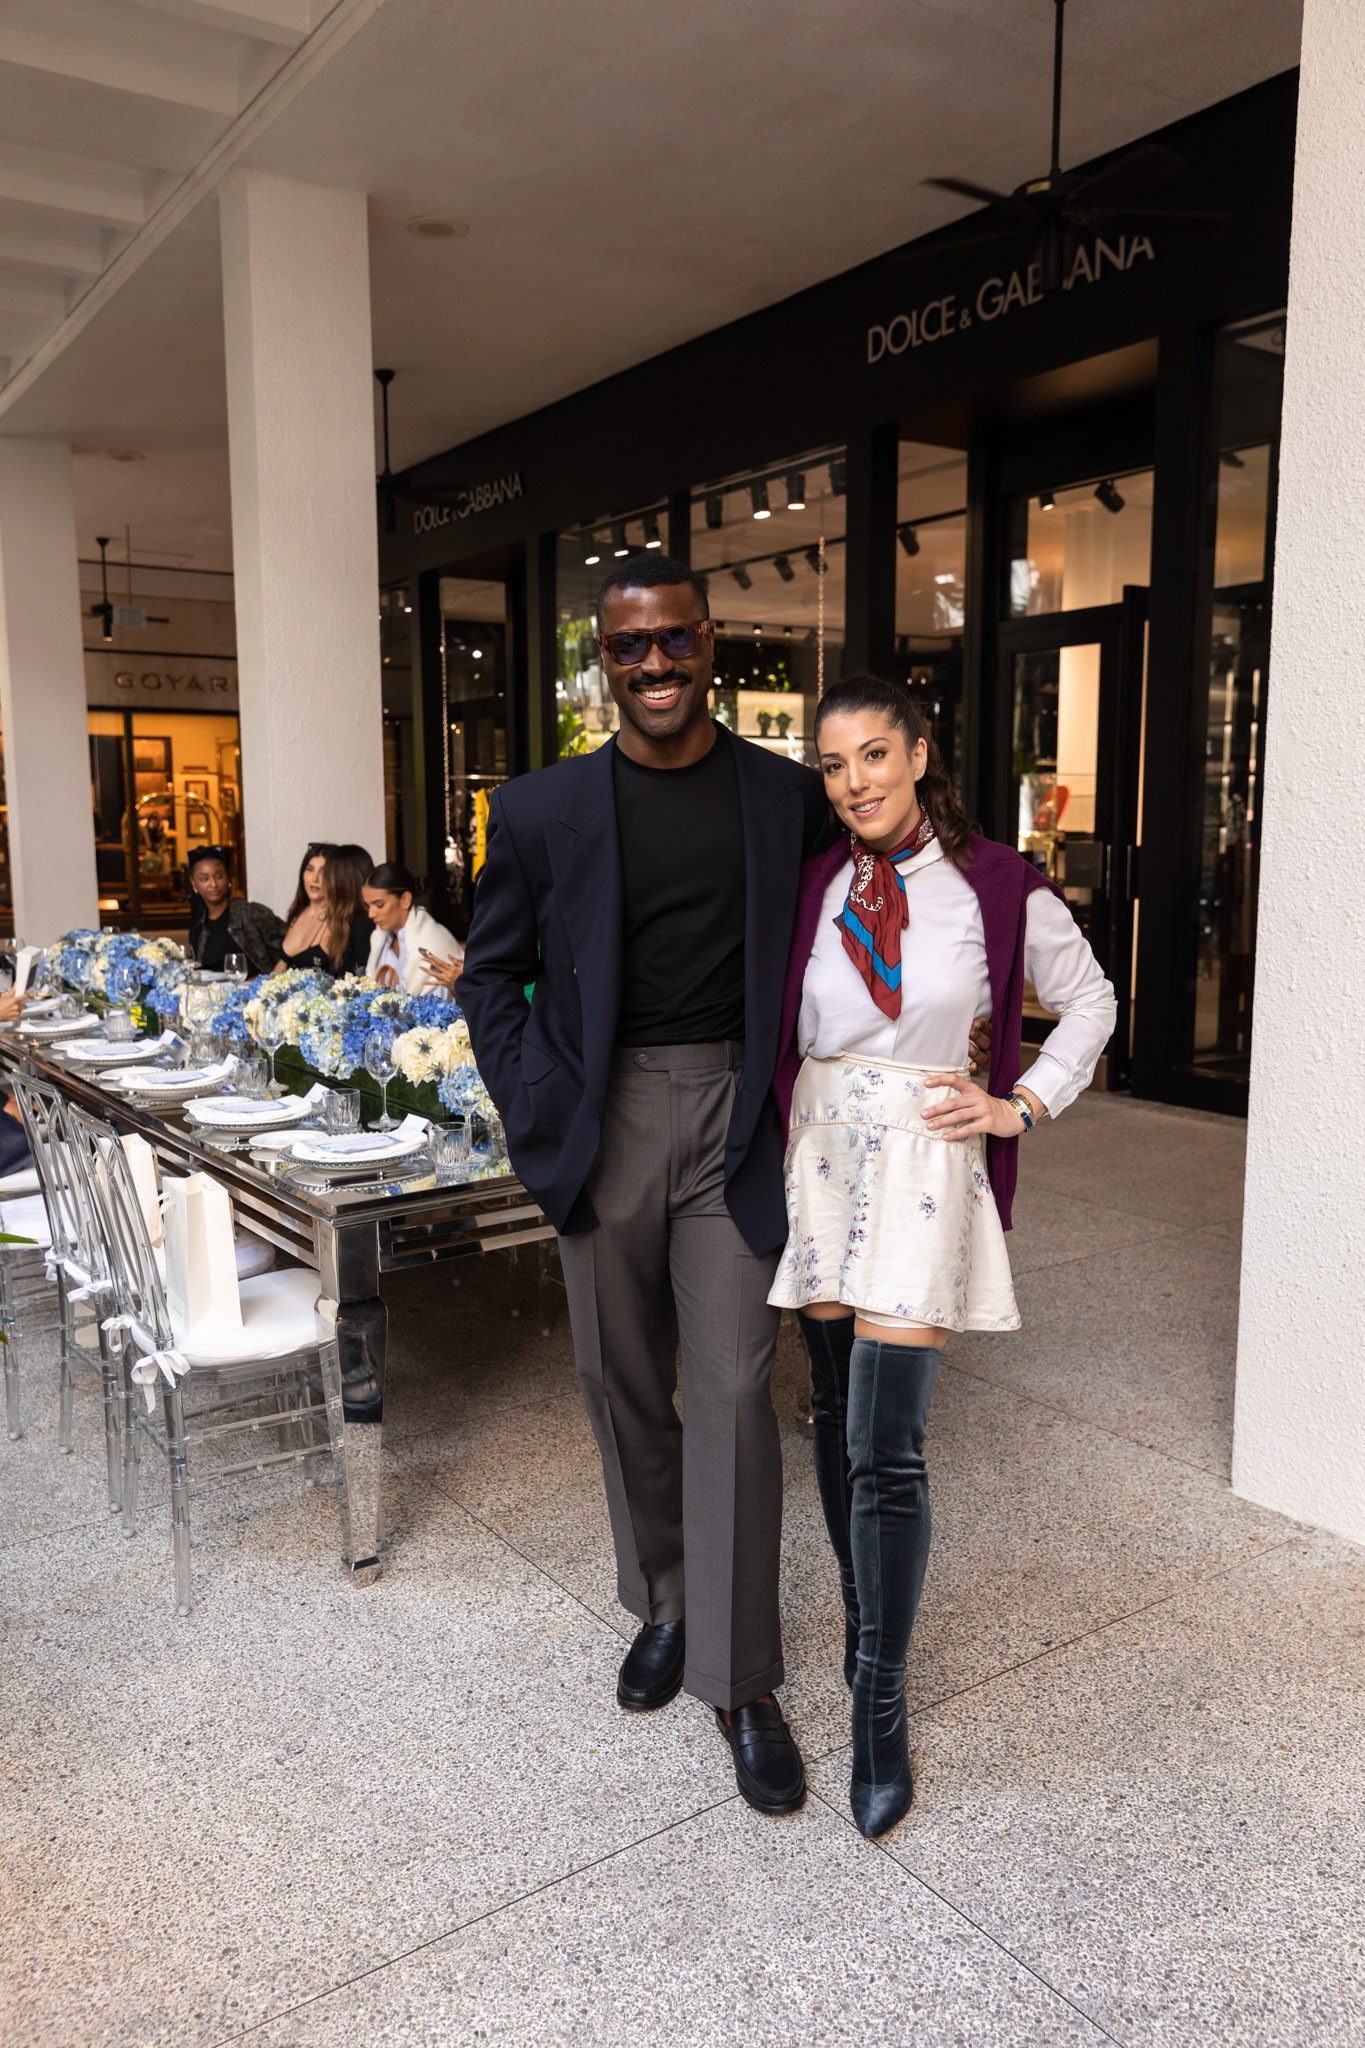 A variety of images showcasing Bal Harbour Shops’ Thanksharing Celebration event. Images include guests in attendance, table décor, and food featured at the event.